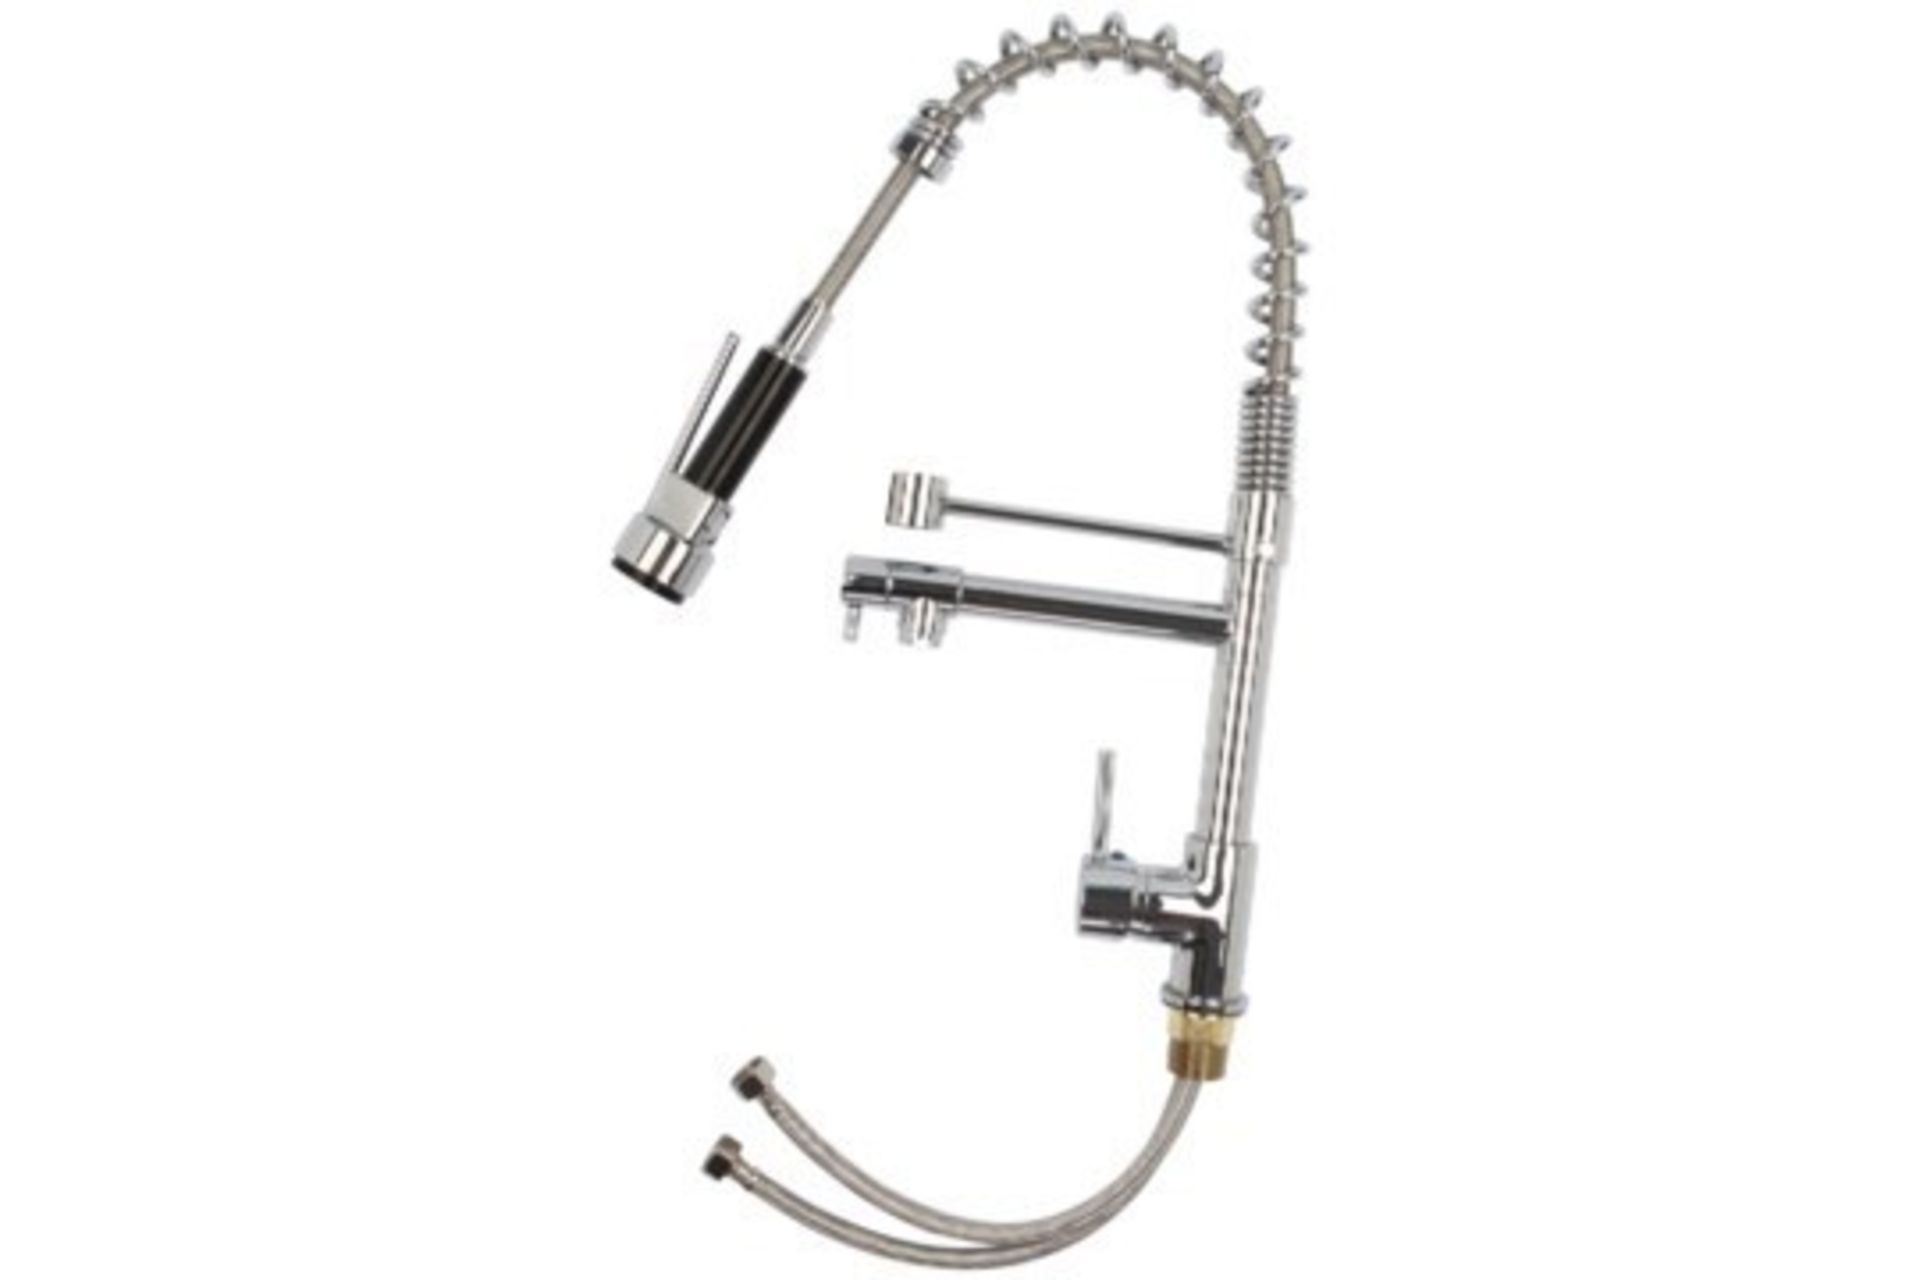 Bentley Modern Monobloc Chrome Brass Pull Out Spray Mixer Tap. RRP £349.99.This tap is from ou...